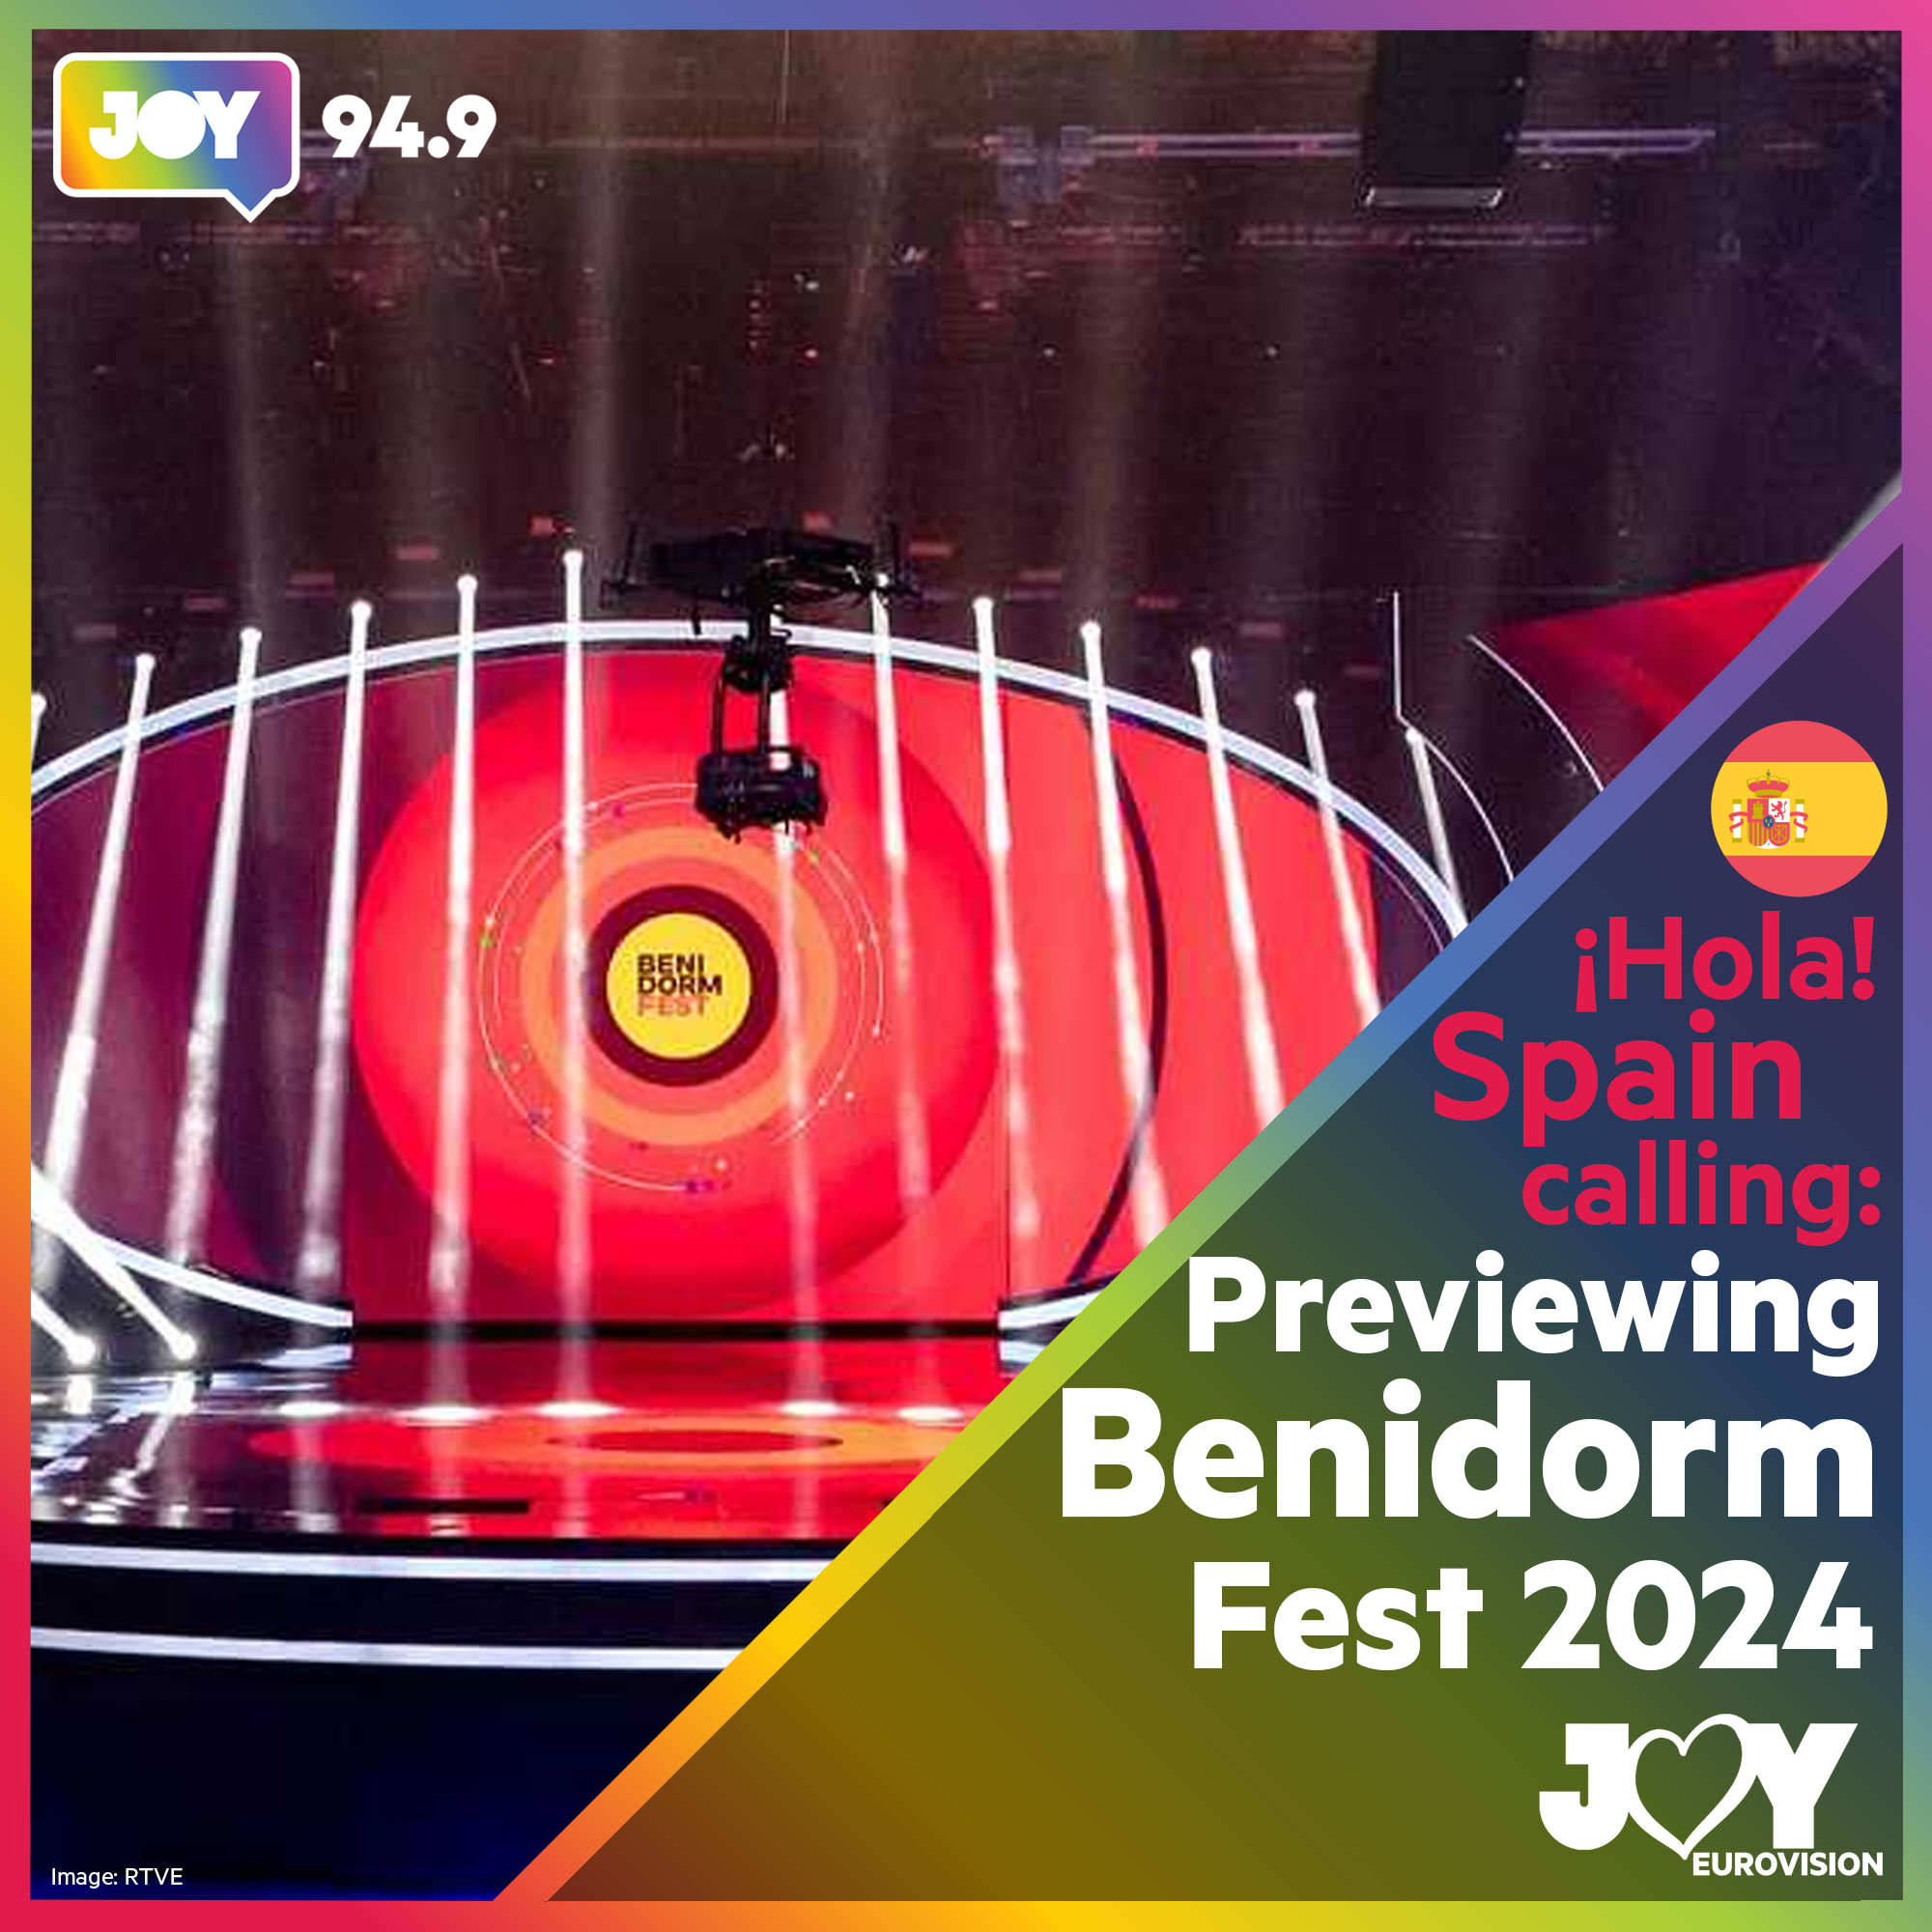 🇪🇸 ¡Hola! Spain calling: Previewing Benidorm Fest 2024